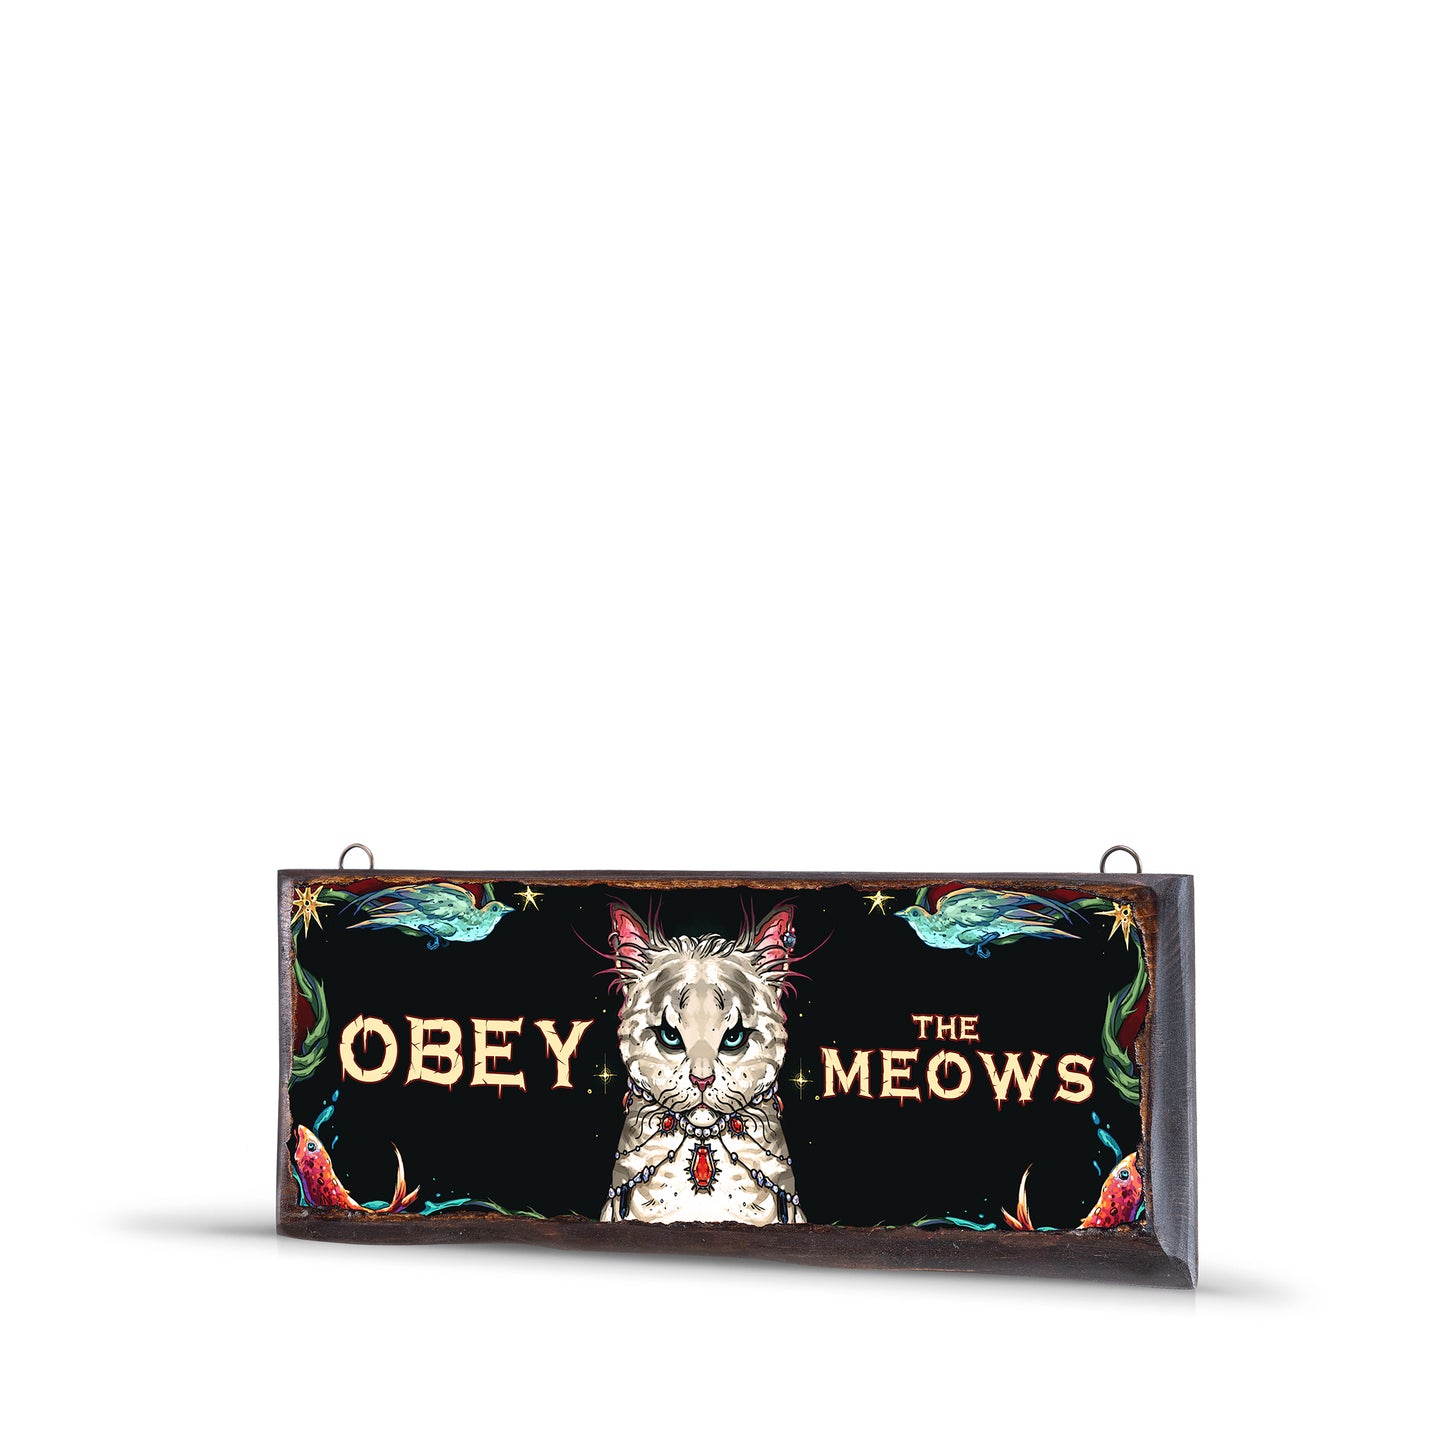 OBEY THE MEOWS WOODEN SIGN - WS038